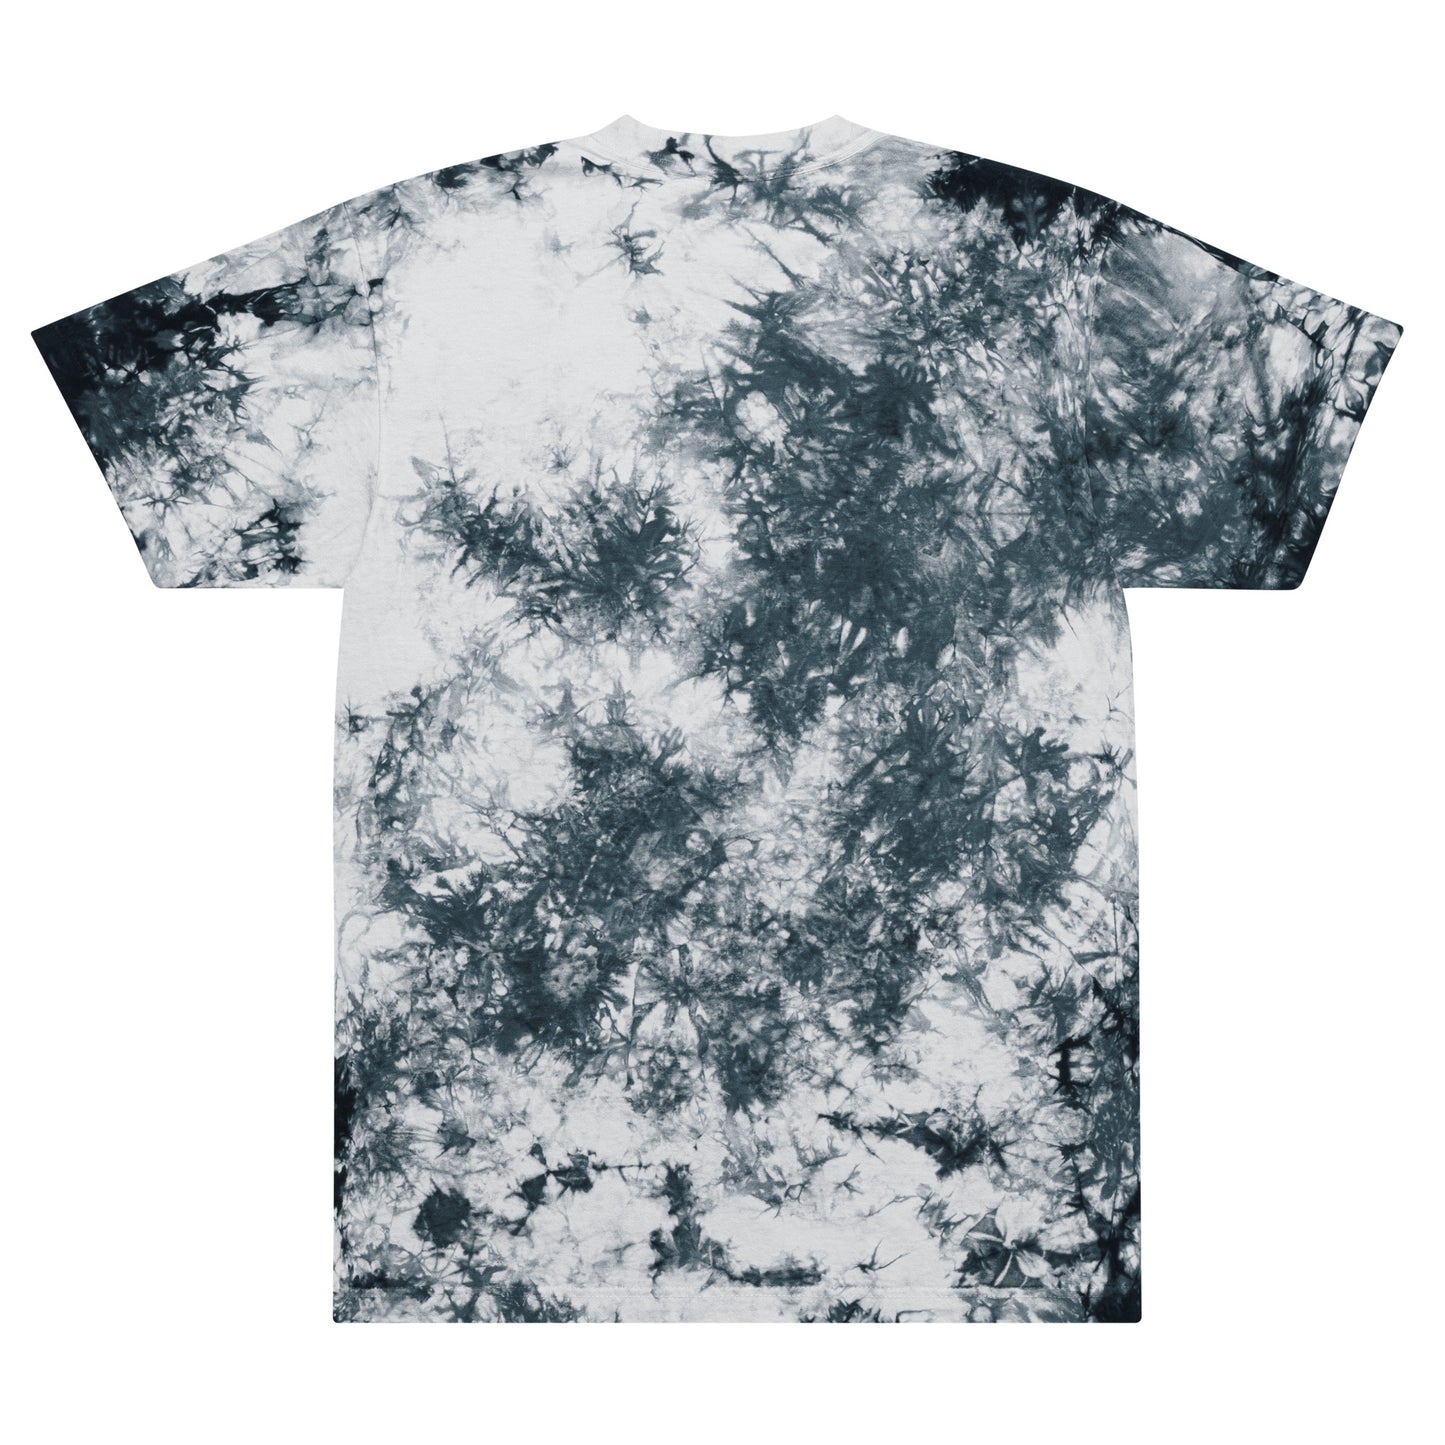 TheLoveUGive tie-dye t-shirt